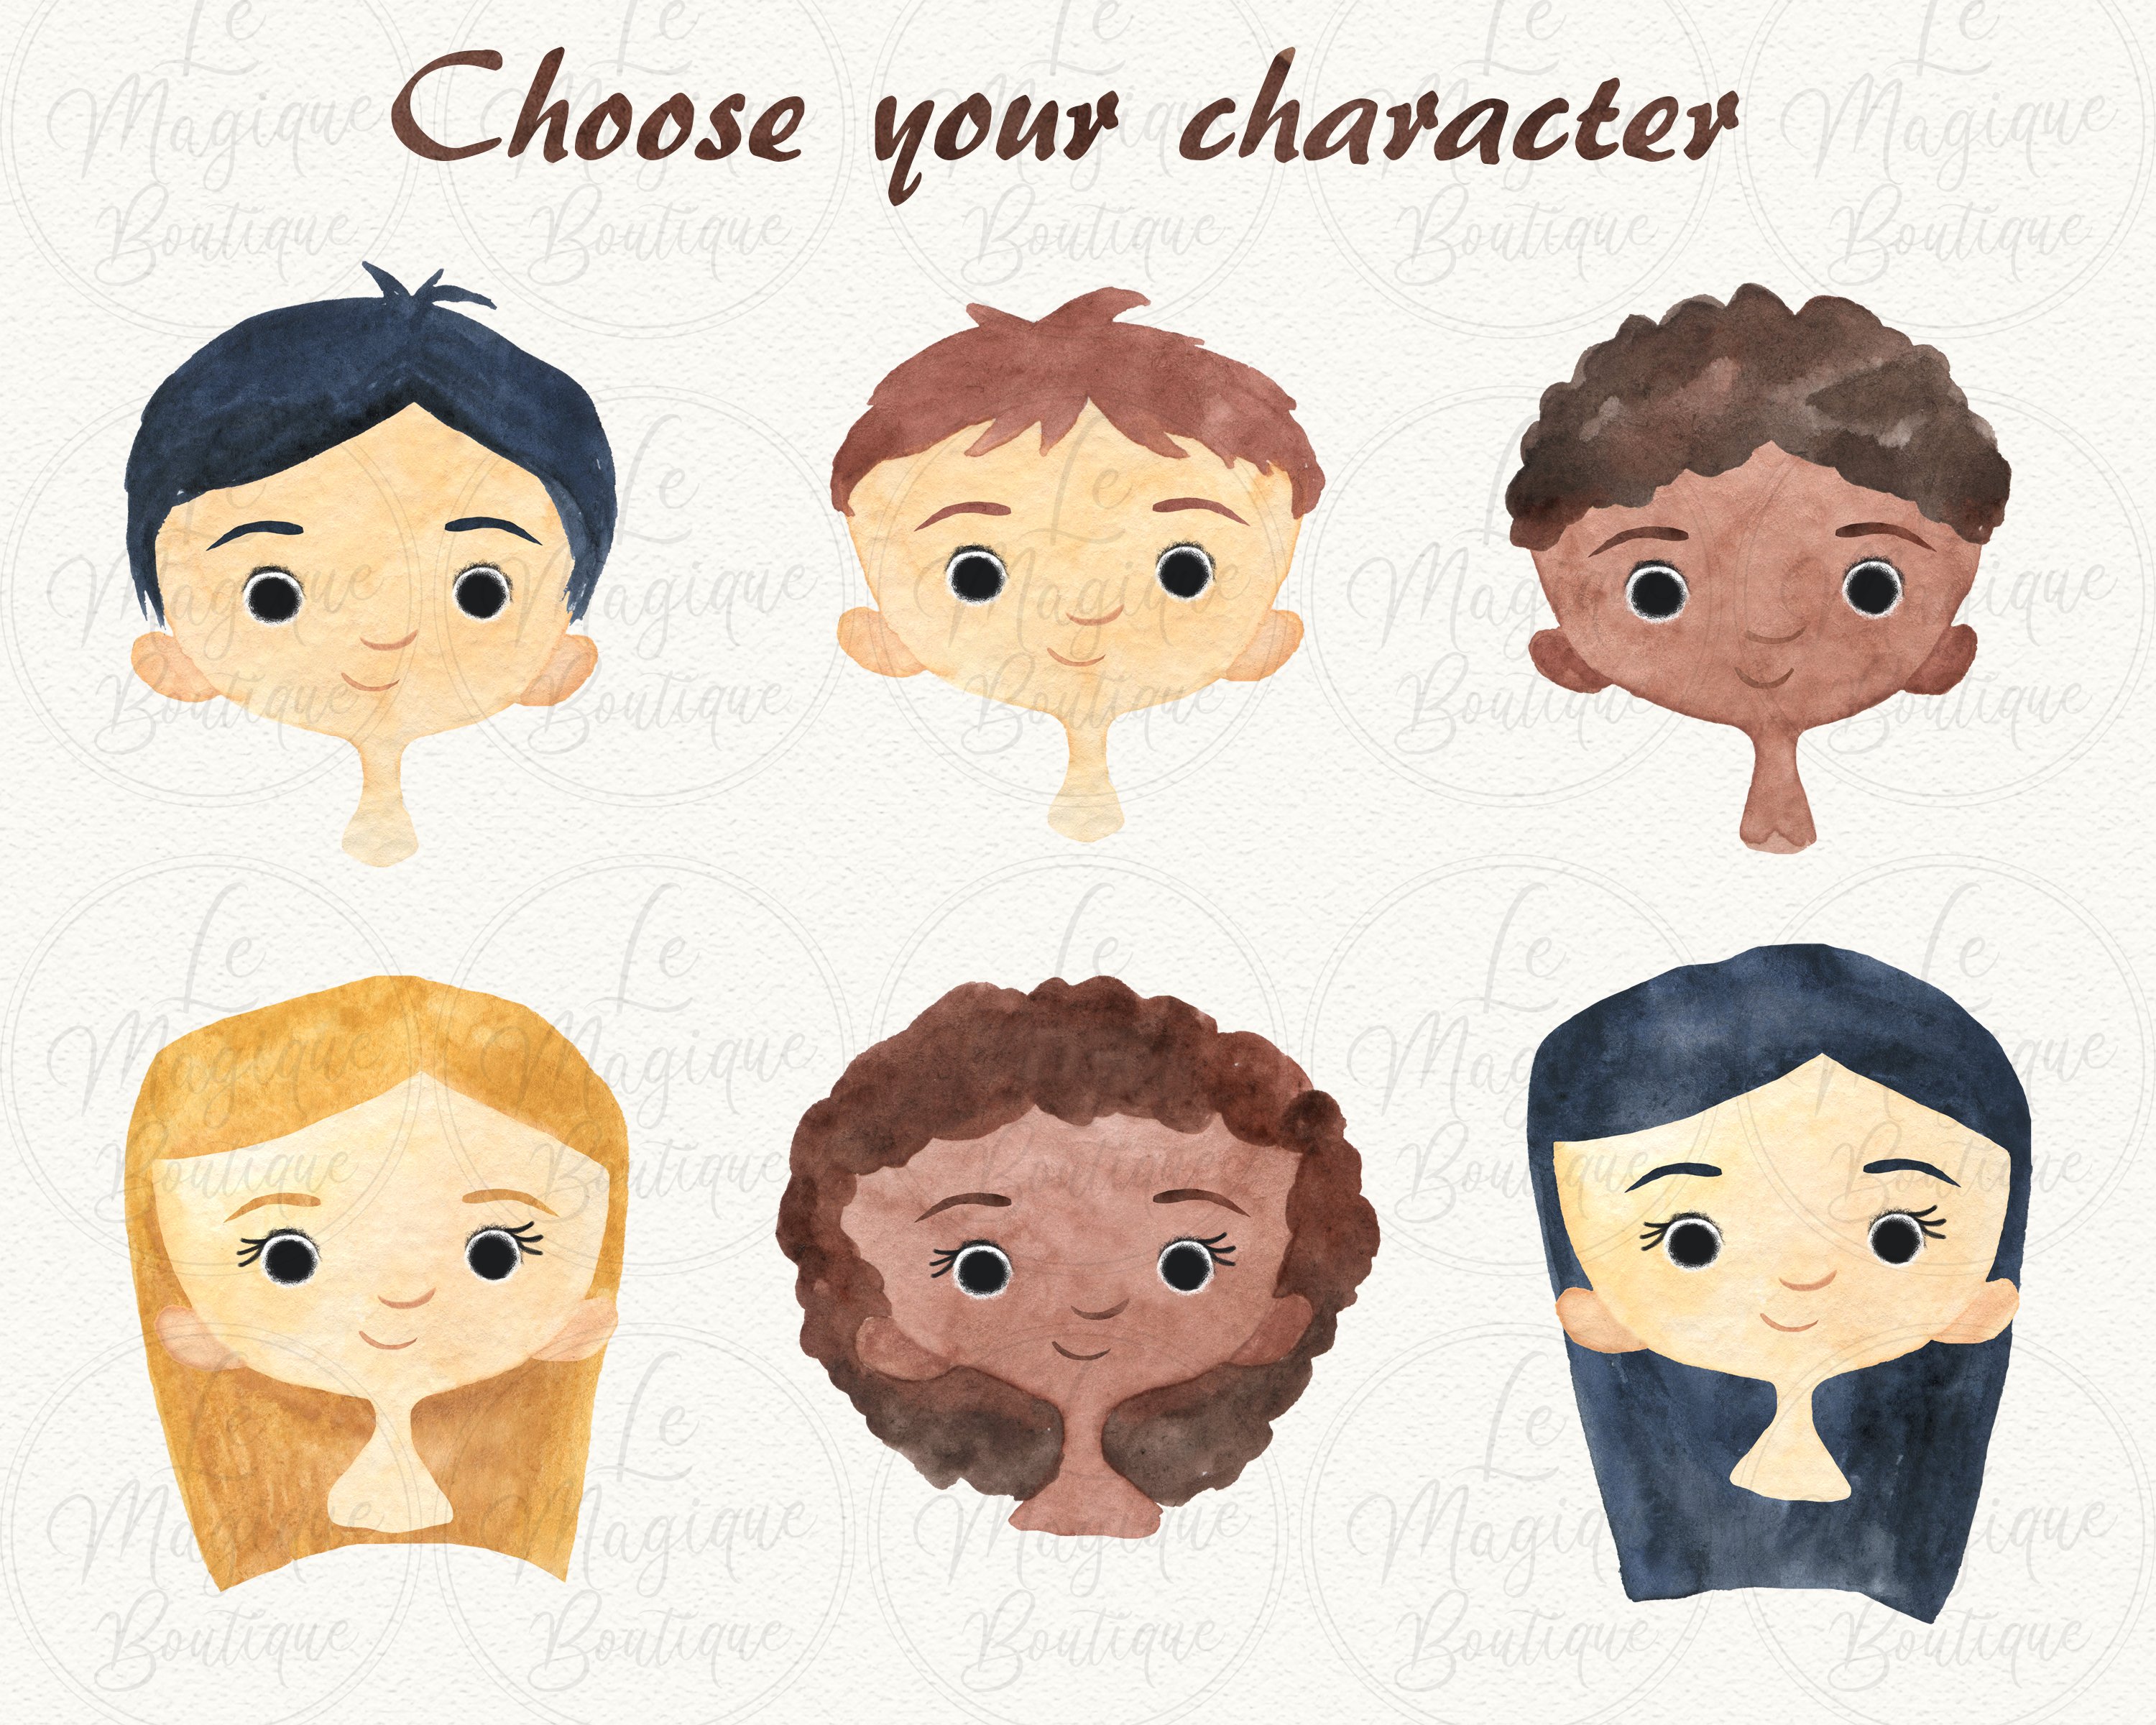 Create your own characters.